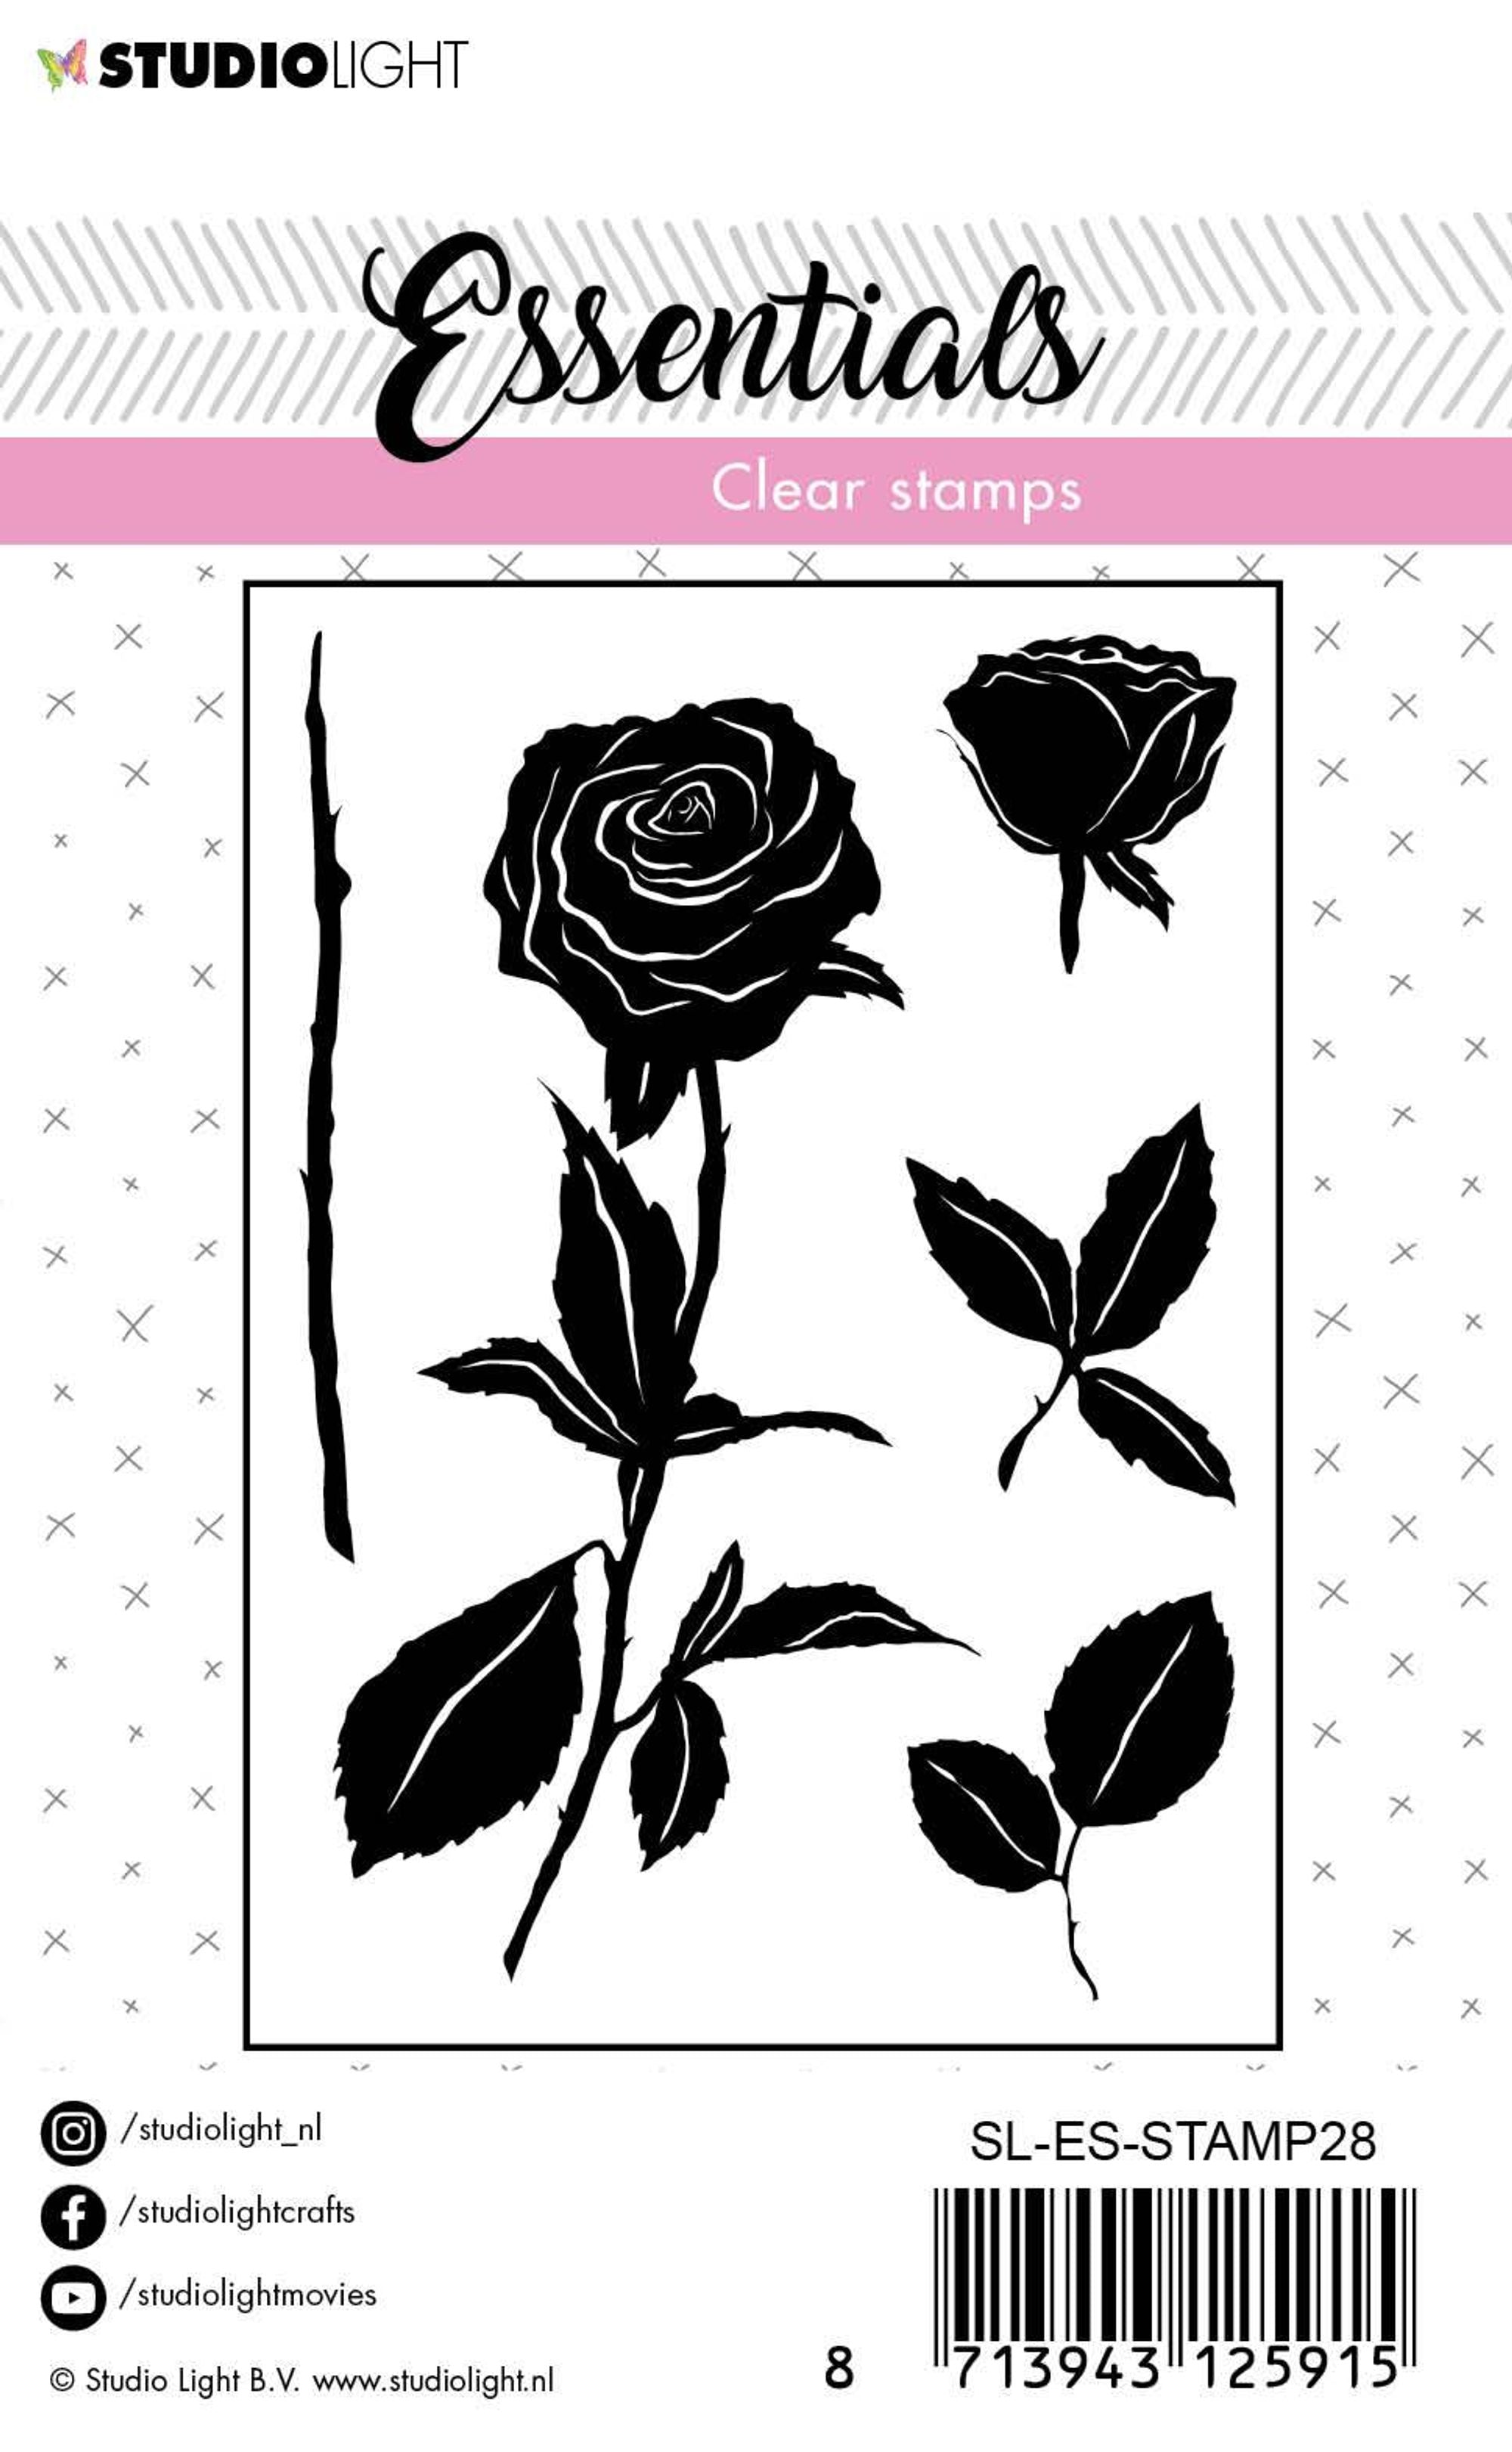 SL Clear Stamp Roses Essentials 73x102,5mm nr.28